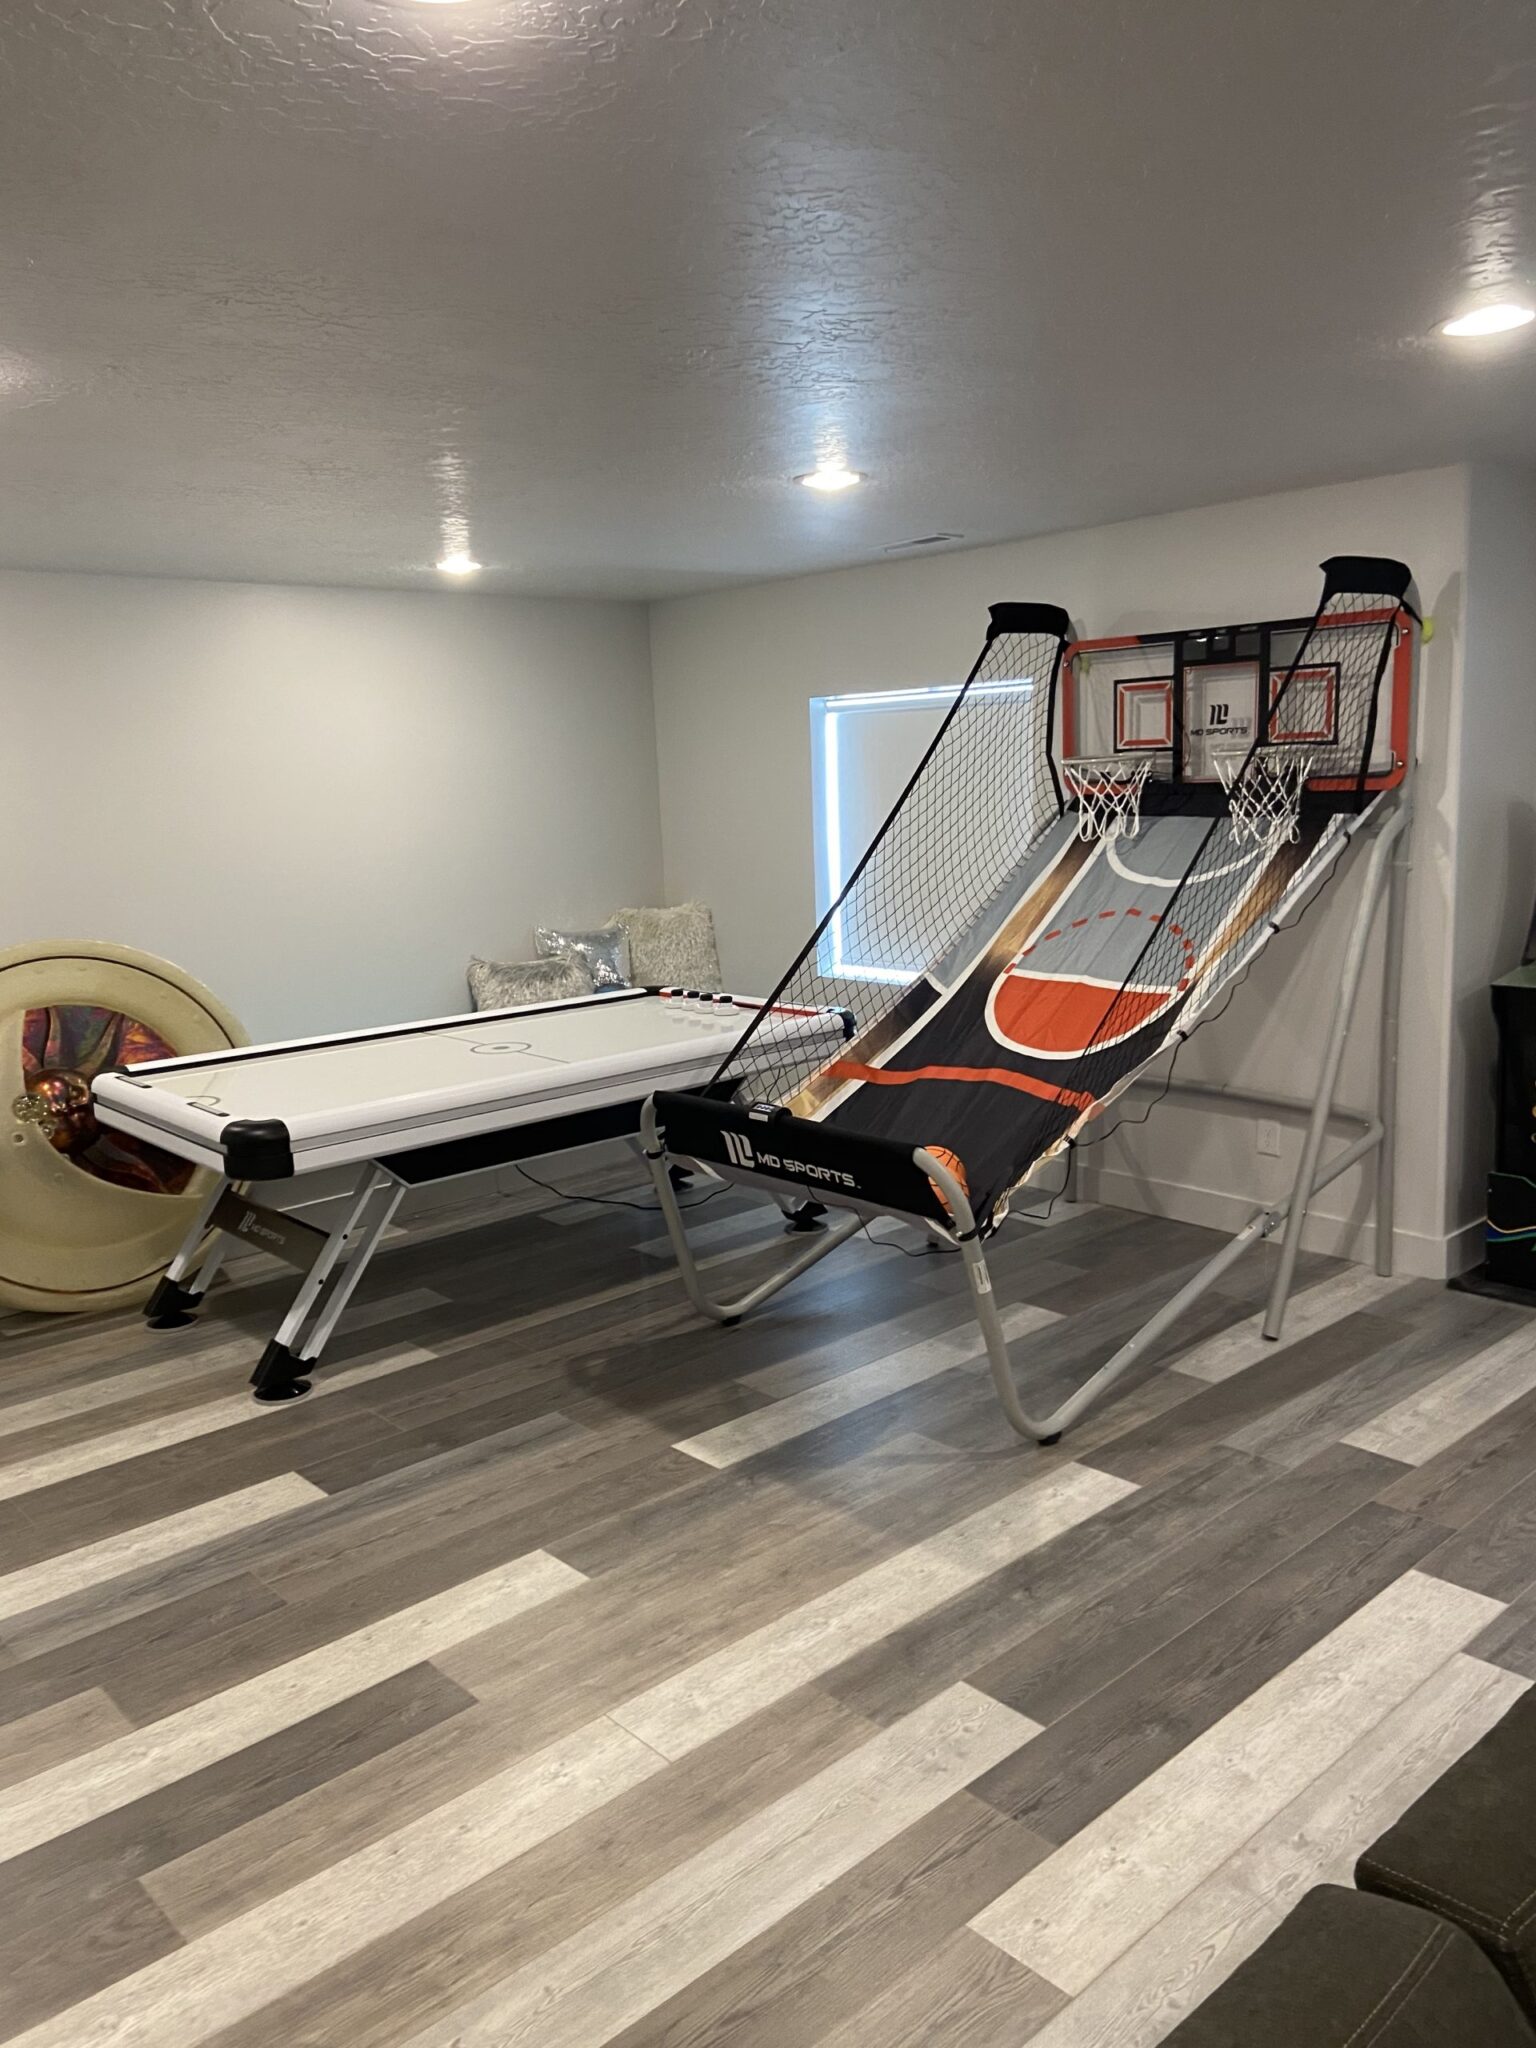 A game room with a pool table, basketball hoop, and a couch. Utah Basement Finishers Man Cave